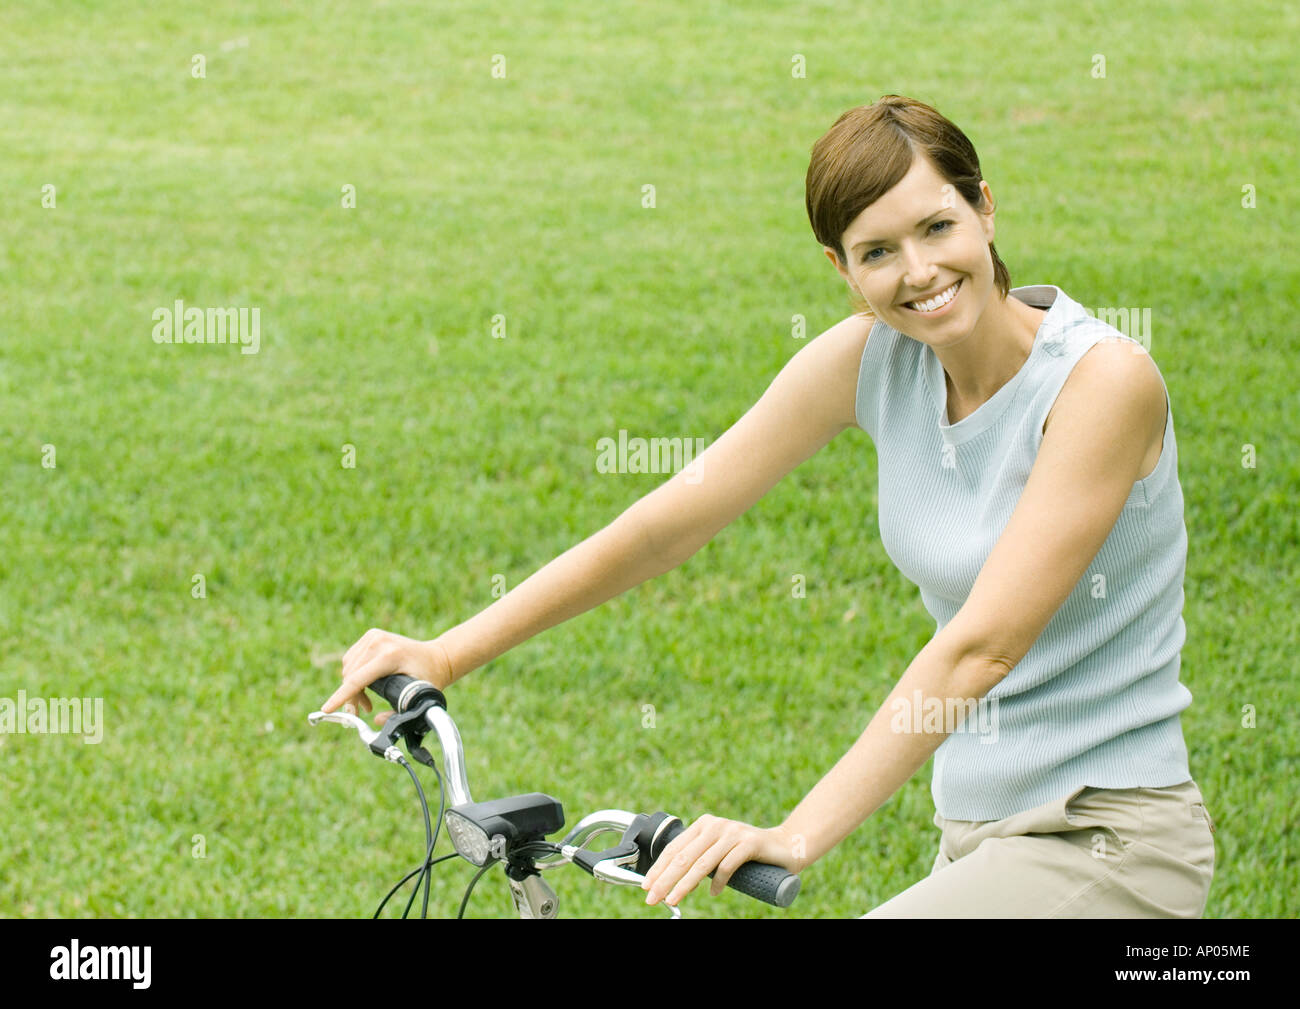 Woman on bicycle, portrait Stock Photo